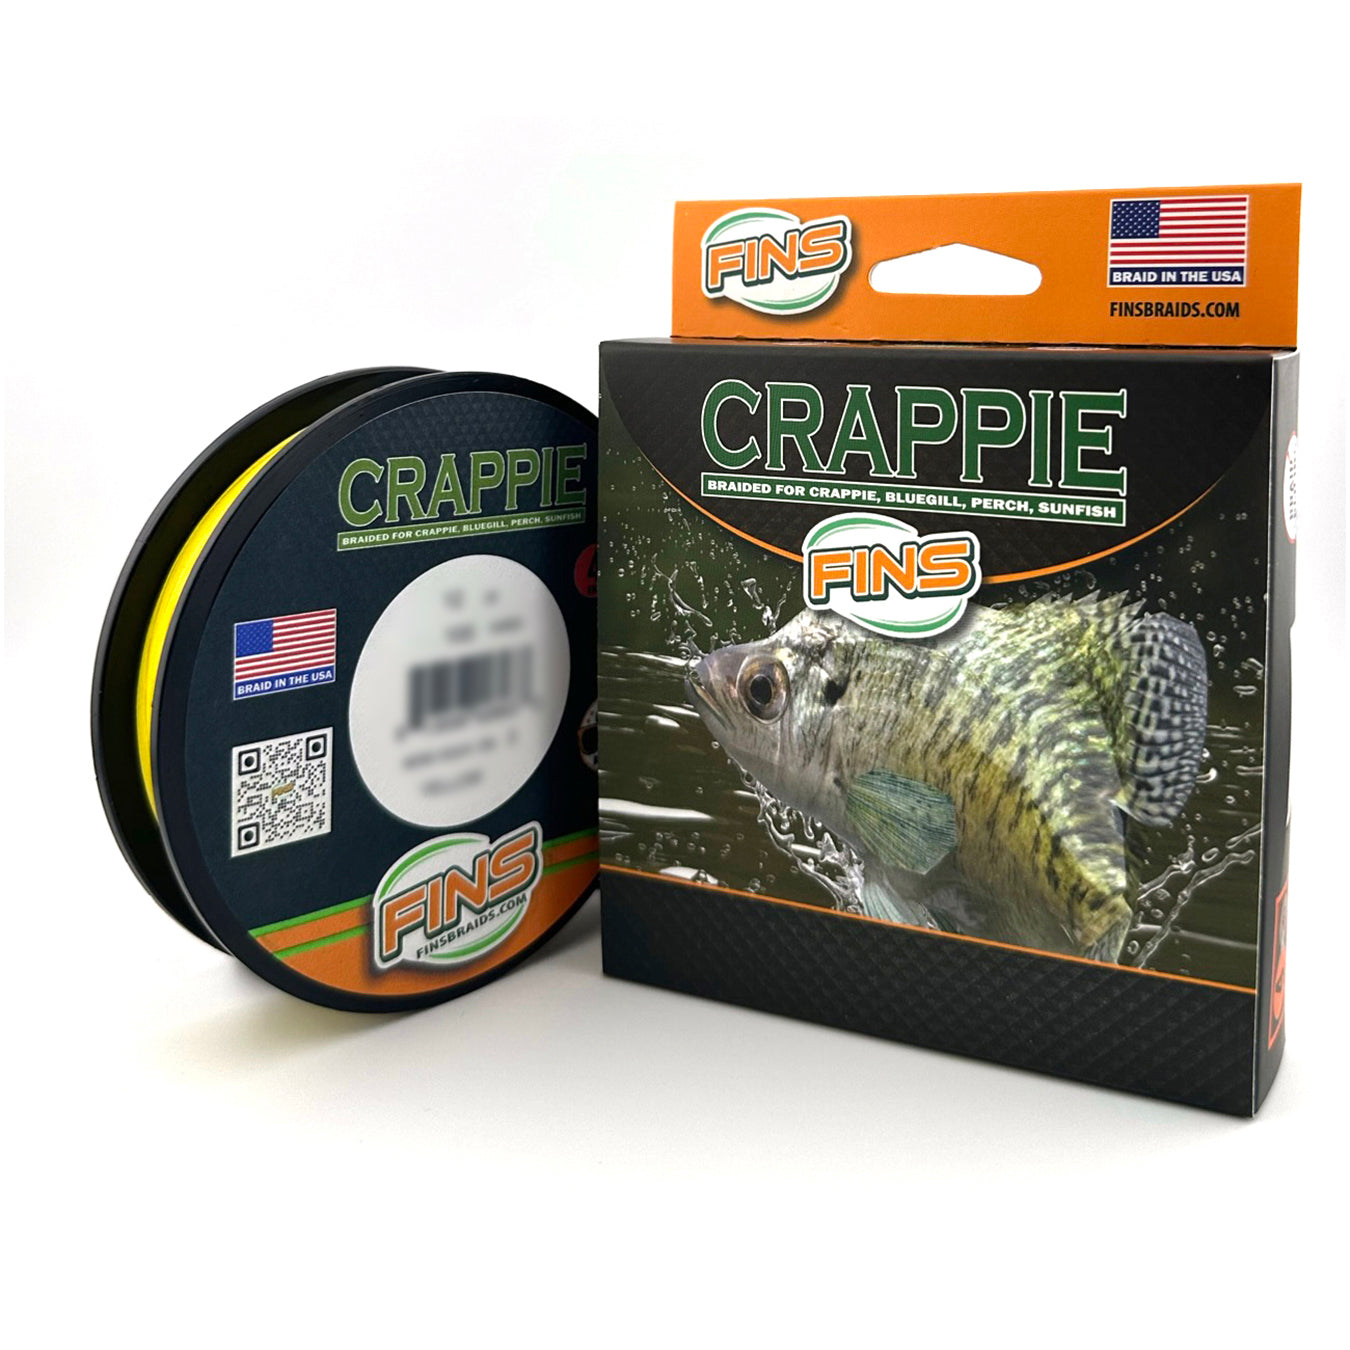 Yellow Spool and box Crappie Braid ultralight diameter, braided for fishing line for crappie, bluegill, perch, sunfish.